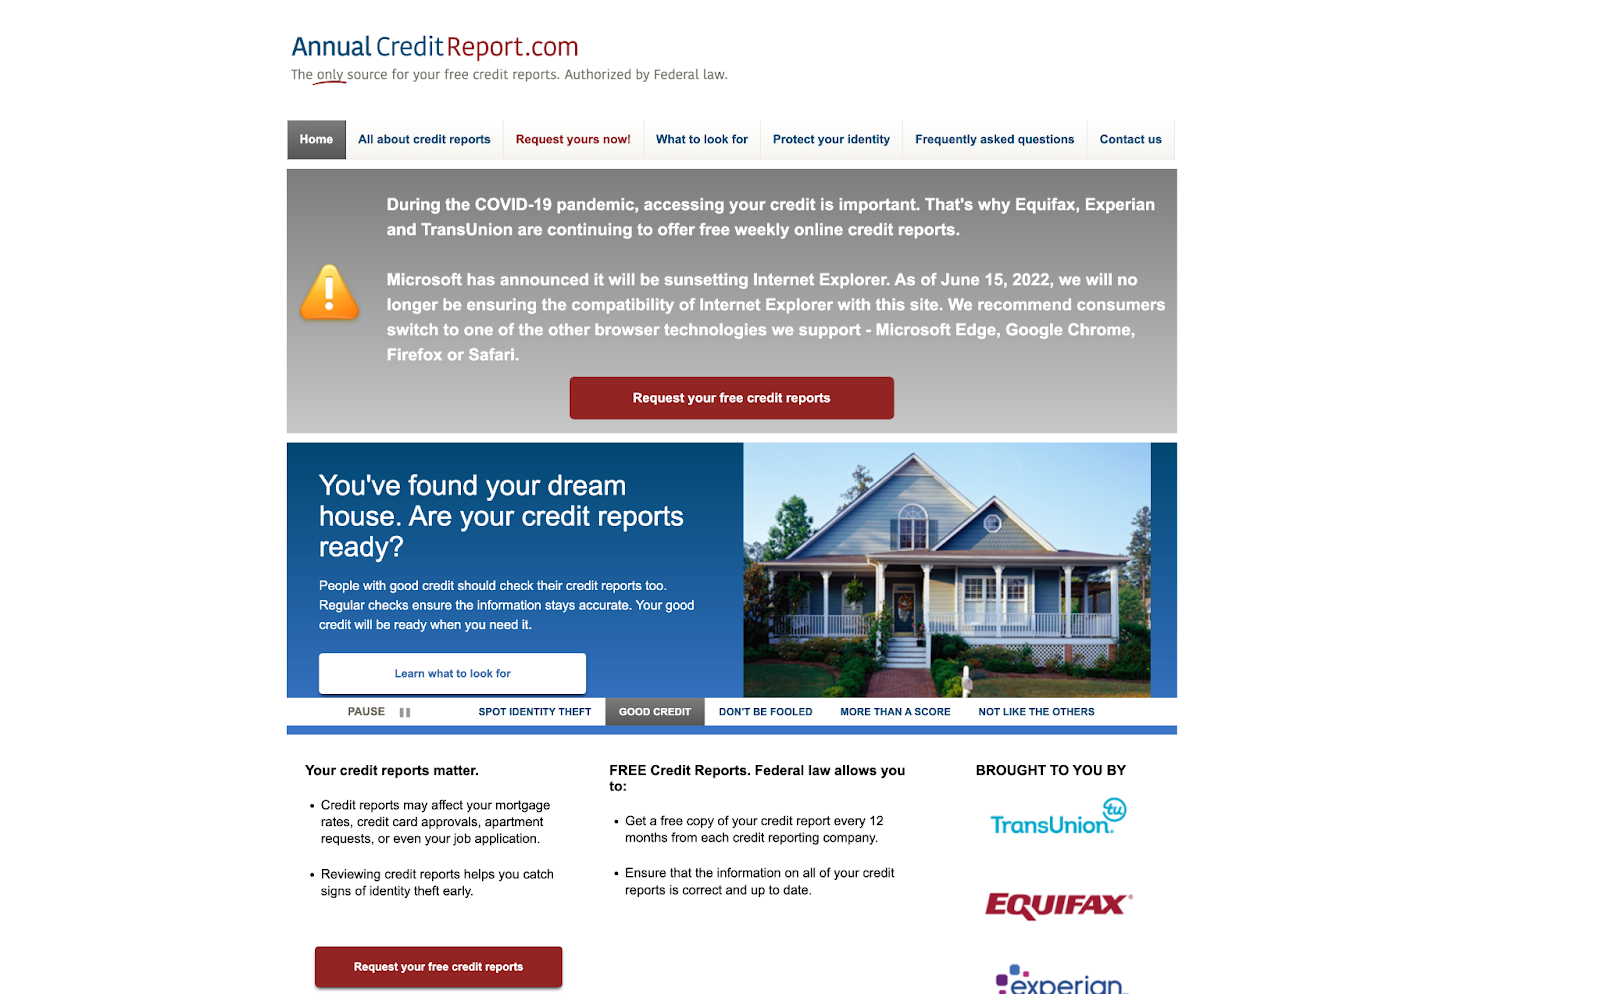 Screenshot of Annual Credit Report.com to get your free credit report.